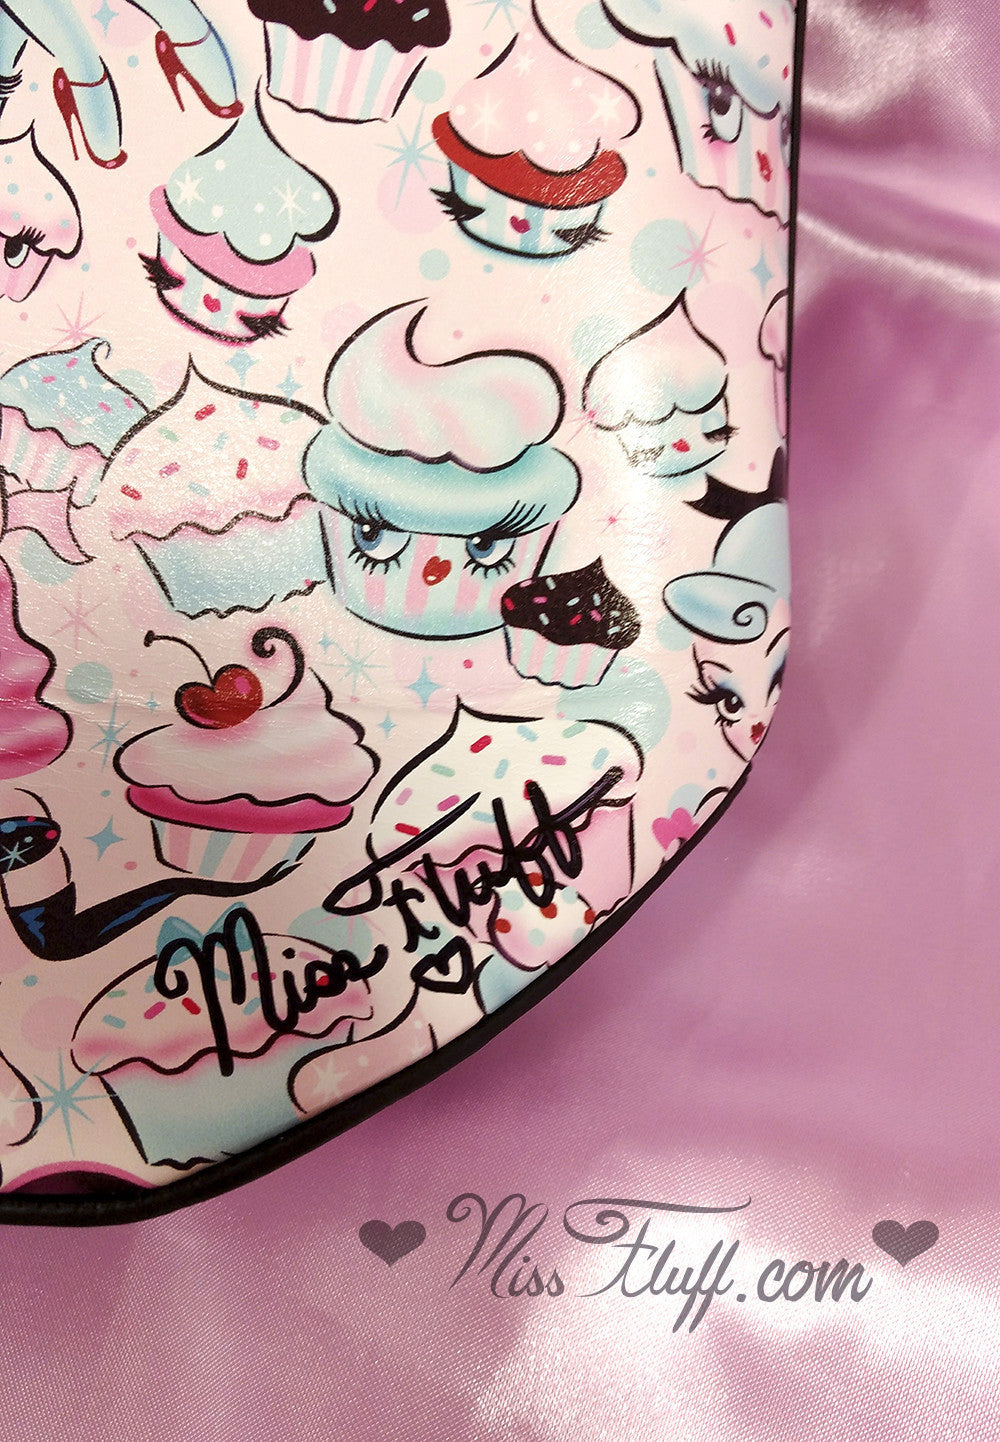 Special CUPCAKE DOLLS TOTE- SIGNED! with ORIGINAL DRAWING!